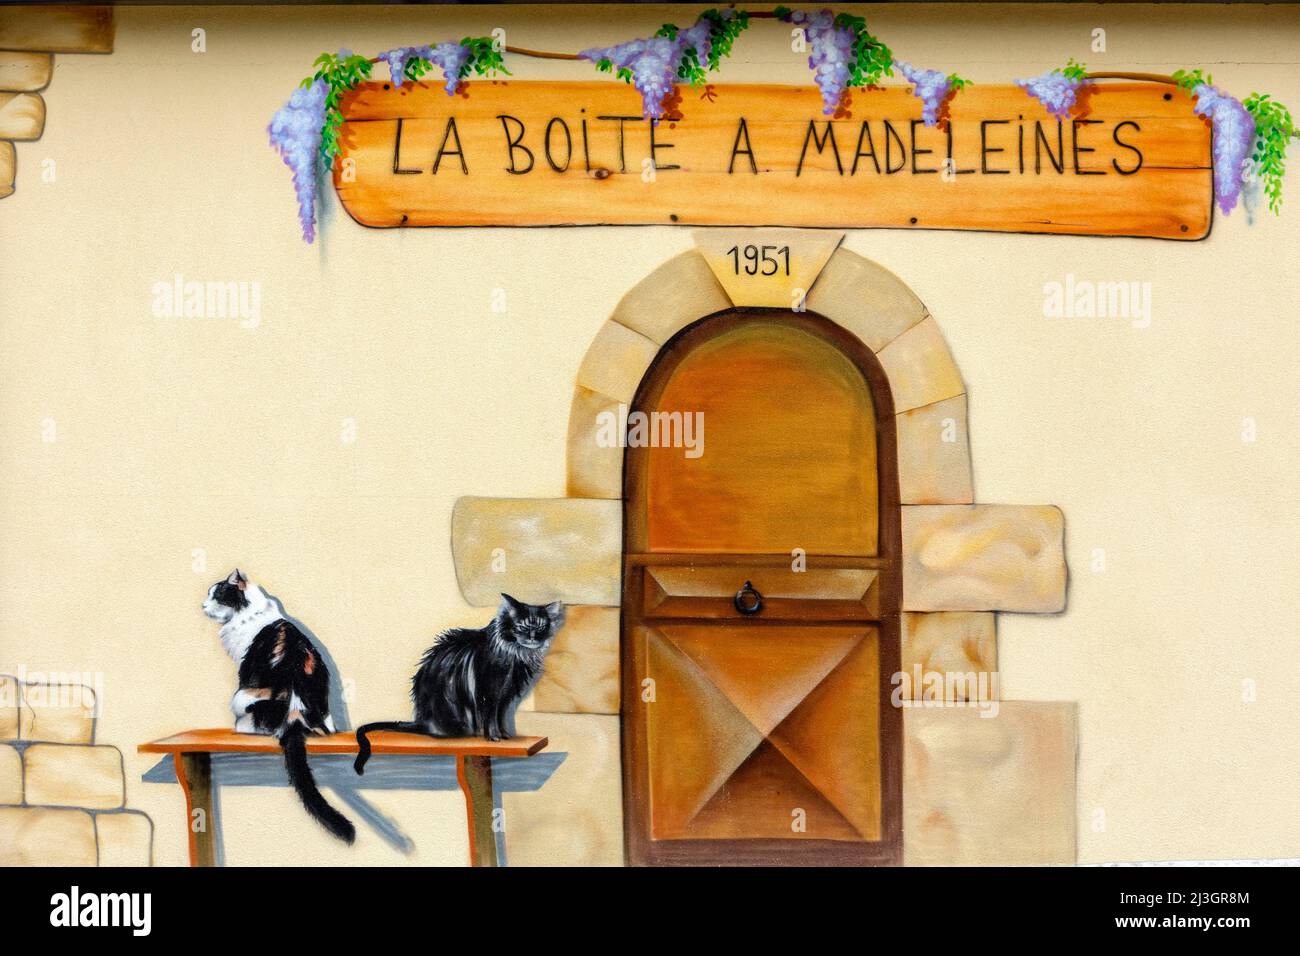 France, Meuse, Commercy, mural painting on the wall of the shop and workshop making madeleines of Commercy La Boite à Madeleines by the Zins brothers, madeleiniers since 1951 Stock Photo